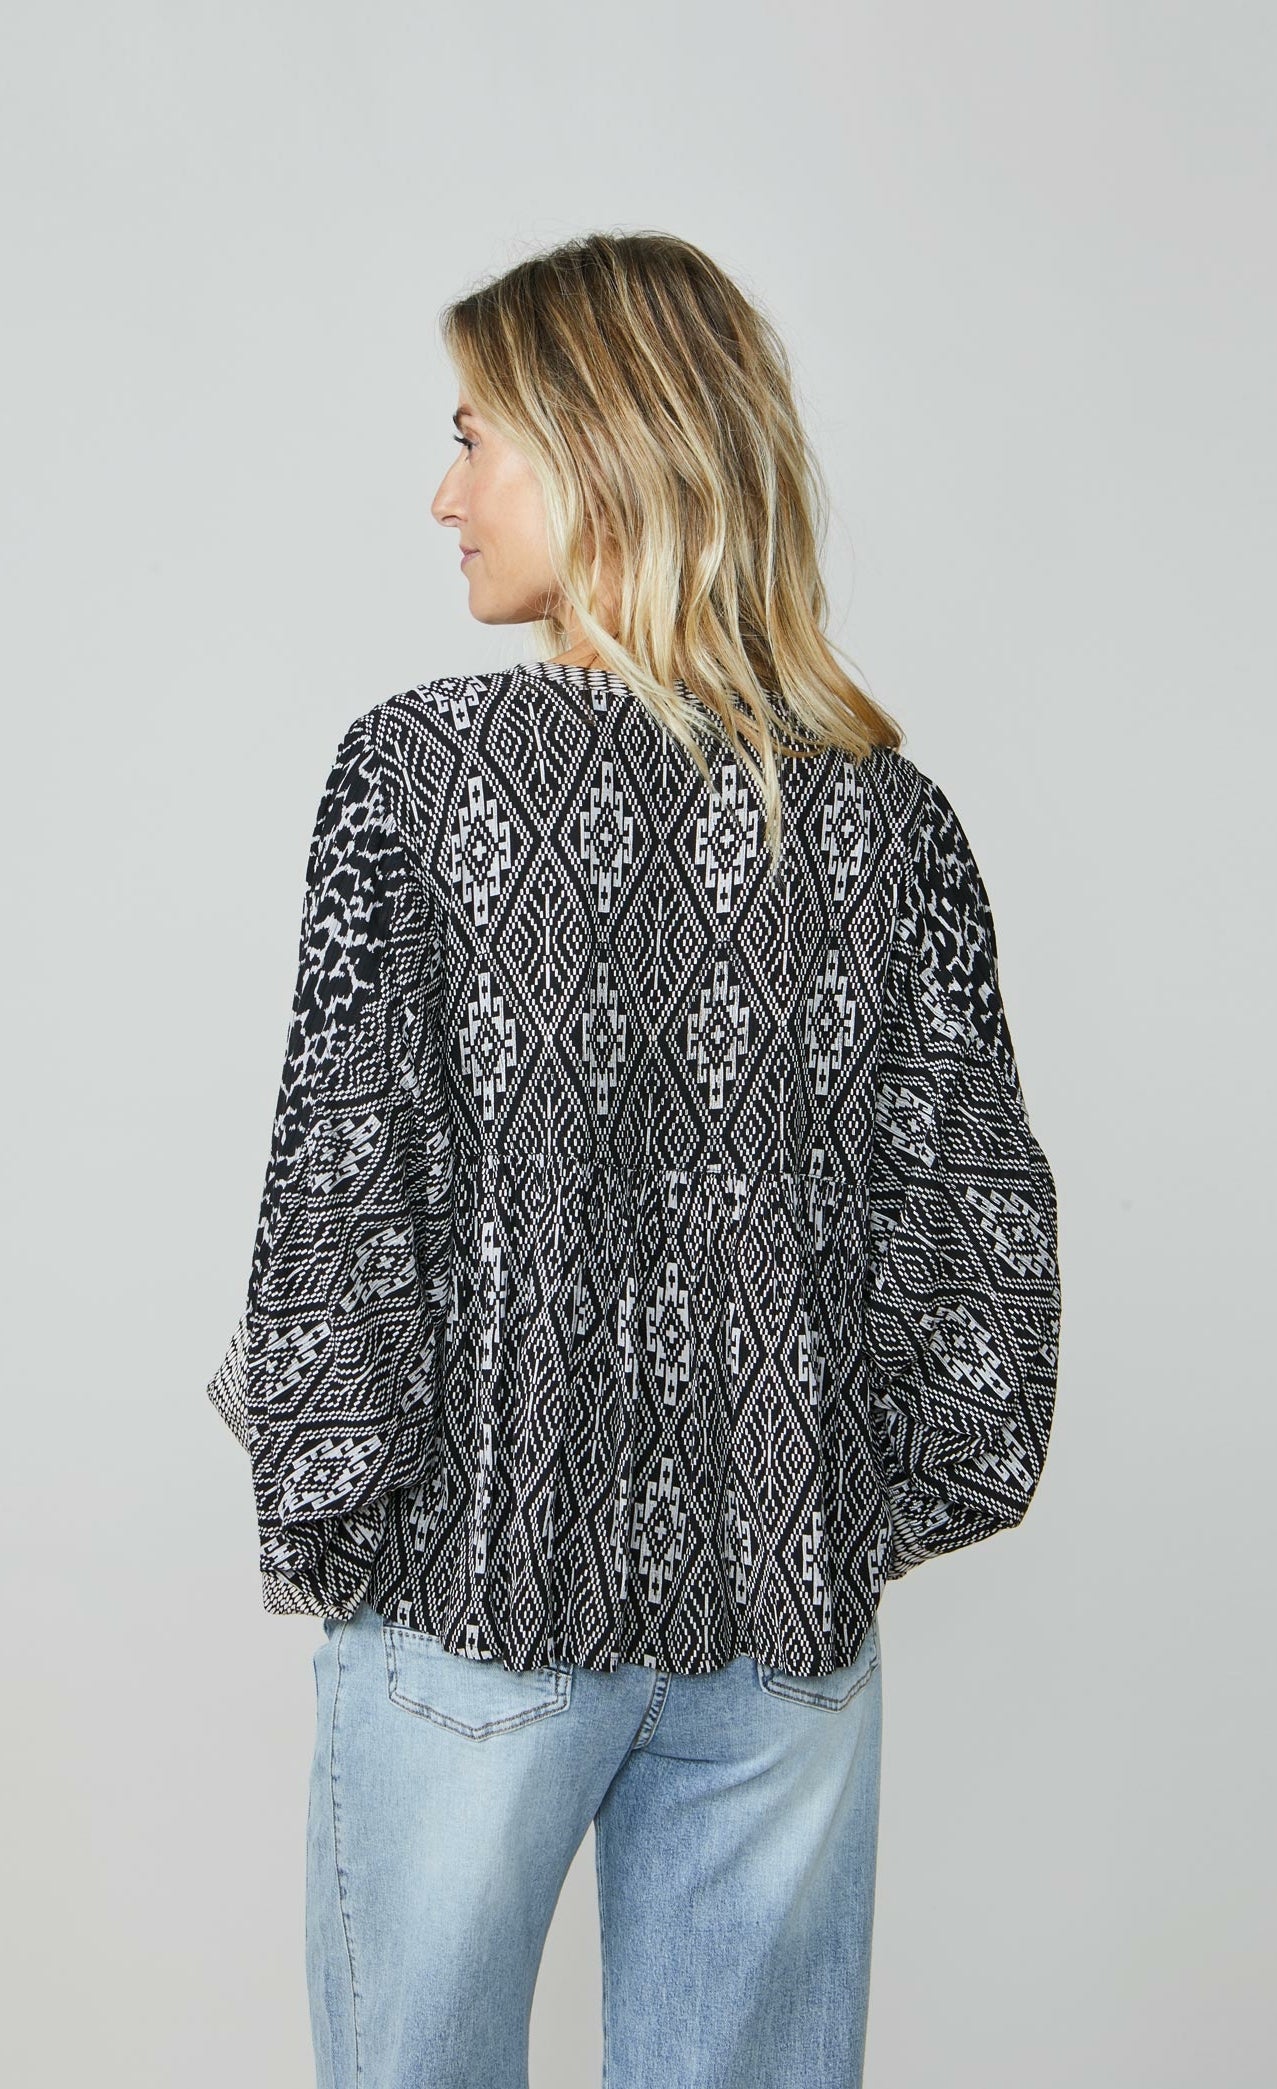 Back top half view of a woman wearing wide leg jeans and the summum kimono printed top. This top is black with a white print. It has an oversized silhouette and long puffy sleeves.